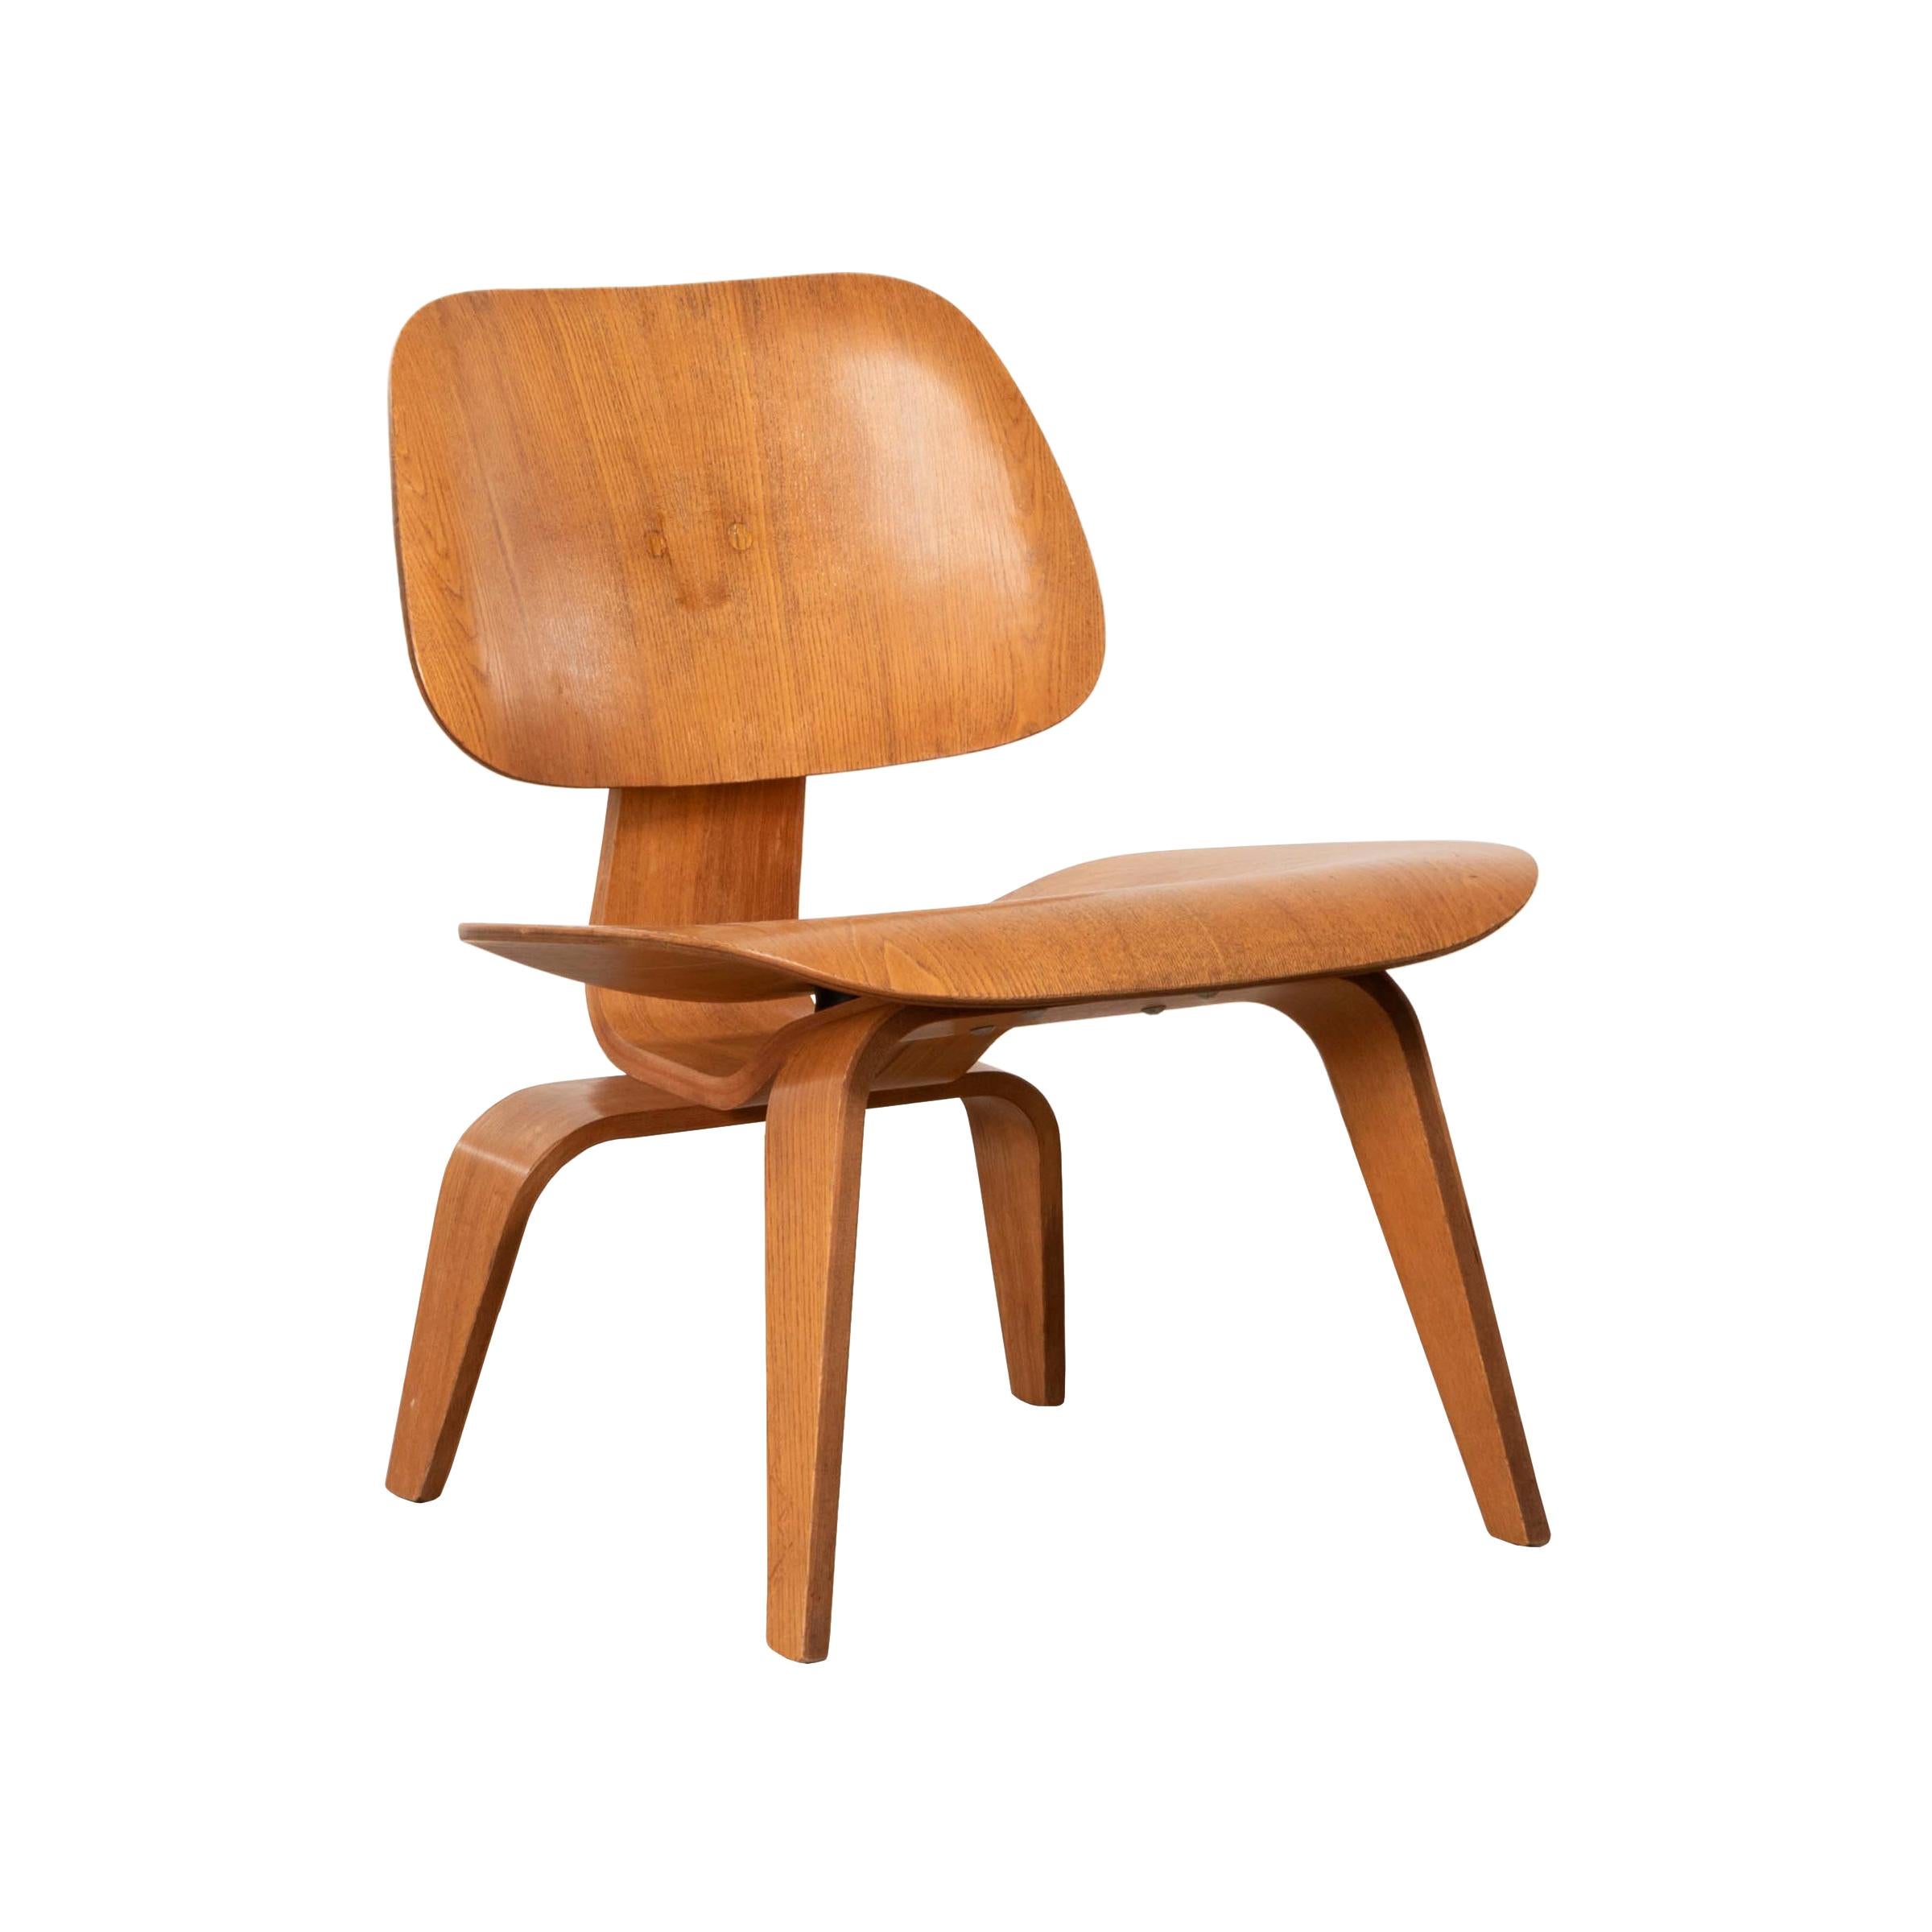 Charles & Ray Eames Early LCW Ash Lounge Chair for Herman Miller, 1951